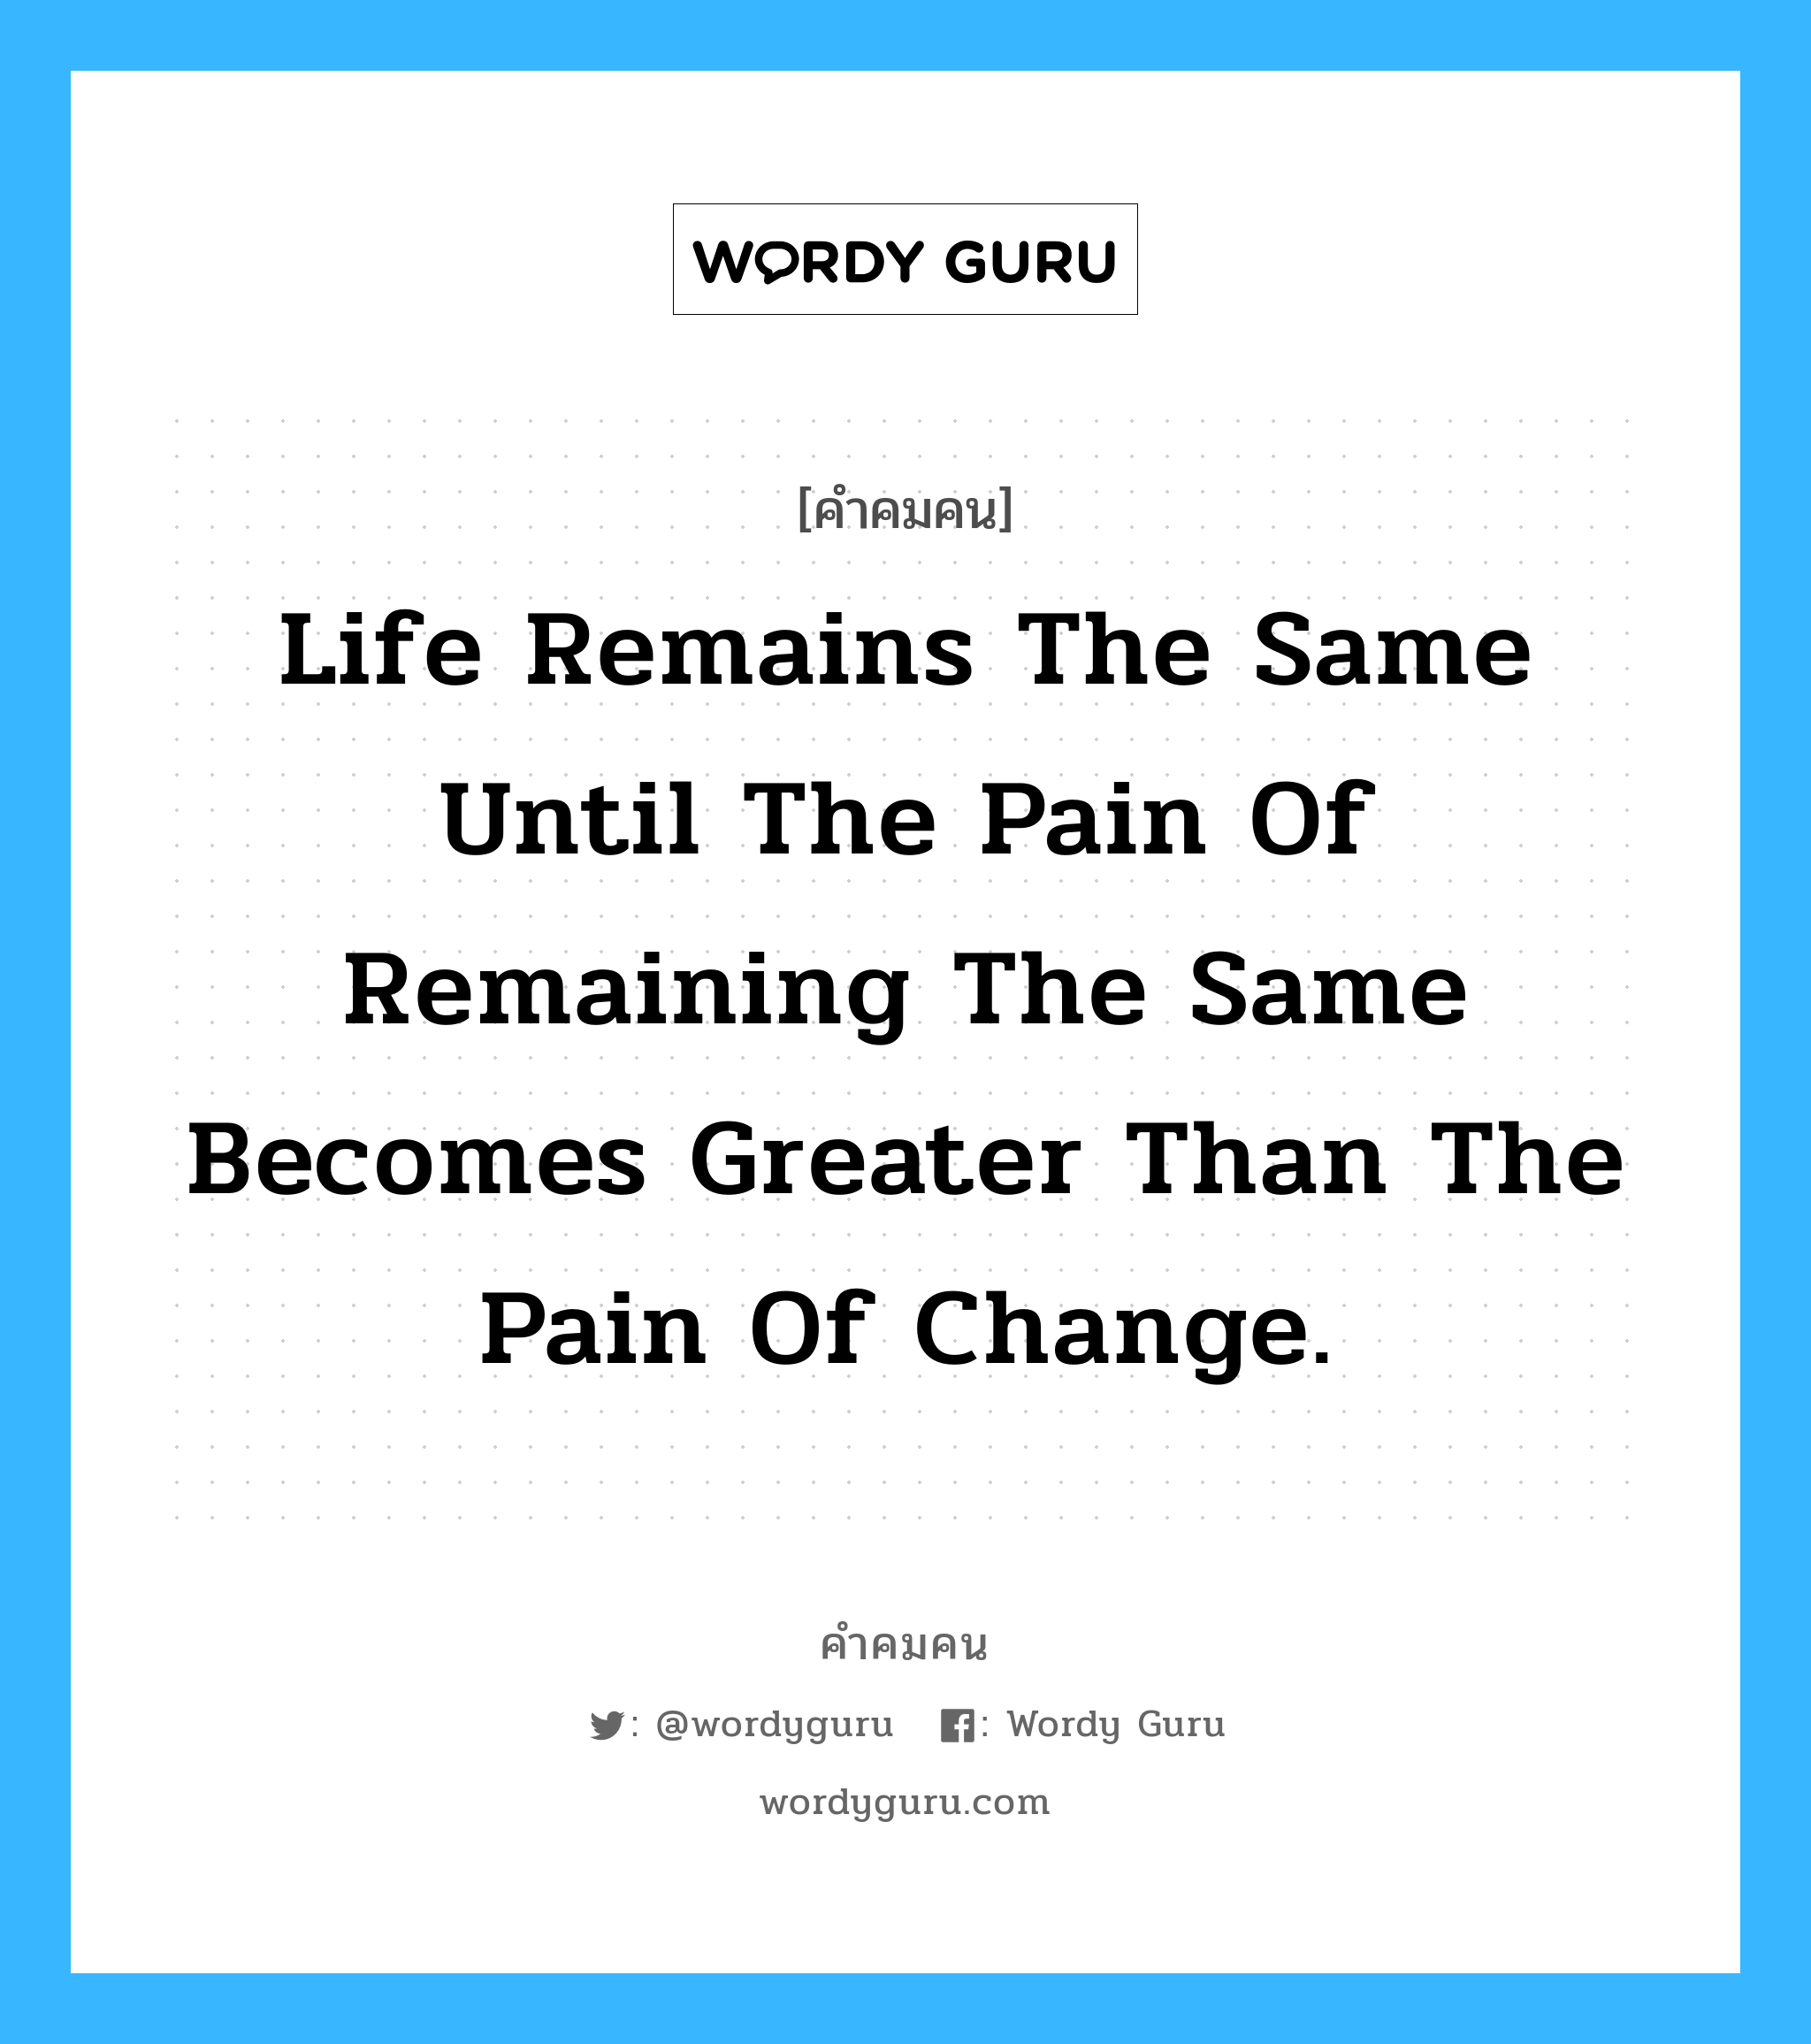 Life remains the same until the pain of remaining the same becomes greater than the pain of change., คำคมคน Life remains the same until the pain of remaining the same becomes greater than the pain of change. ชีวิตจะไม่มีการเปลี่ยนแปลงจนกระทั่งความเจ็บปวดจากความนิ่งเฉย จะมากกว่าความเจ็บปวดจากการเปลี่ยนแปลง Anonymous หมวด Anonymous